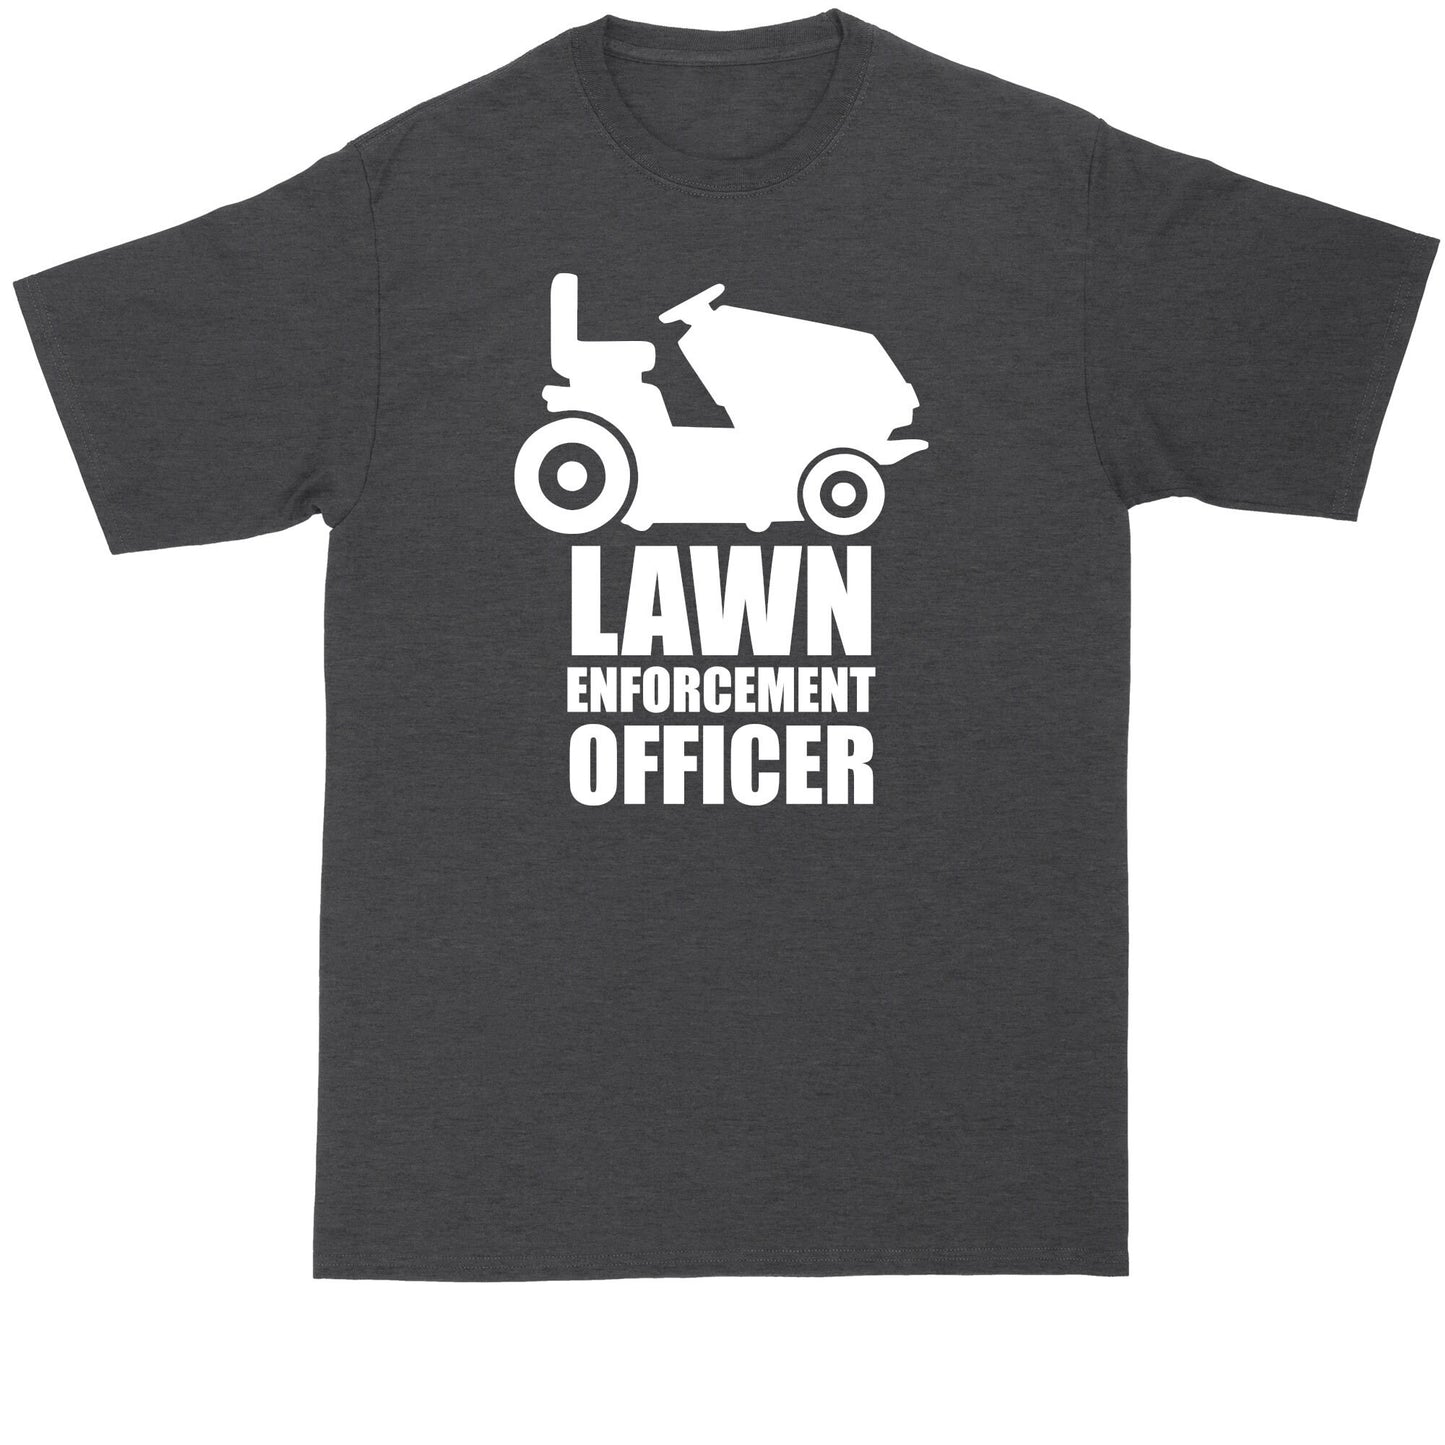 Lawn Enforcement Officer | Lawn Mowing Shirt | Mens Big and Tall T-Shirt